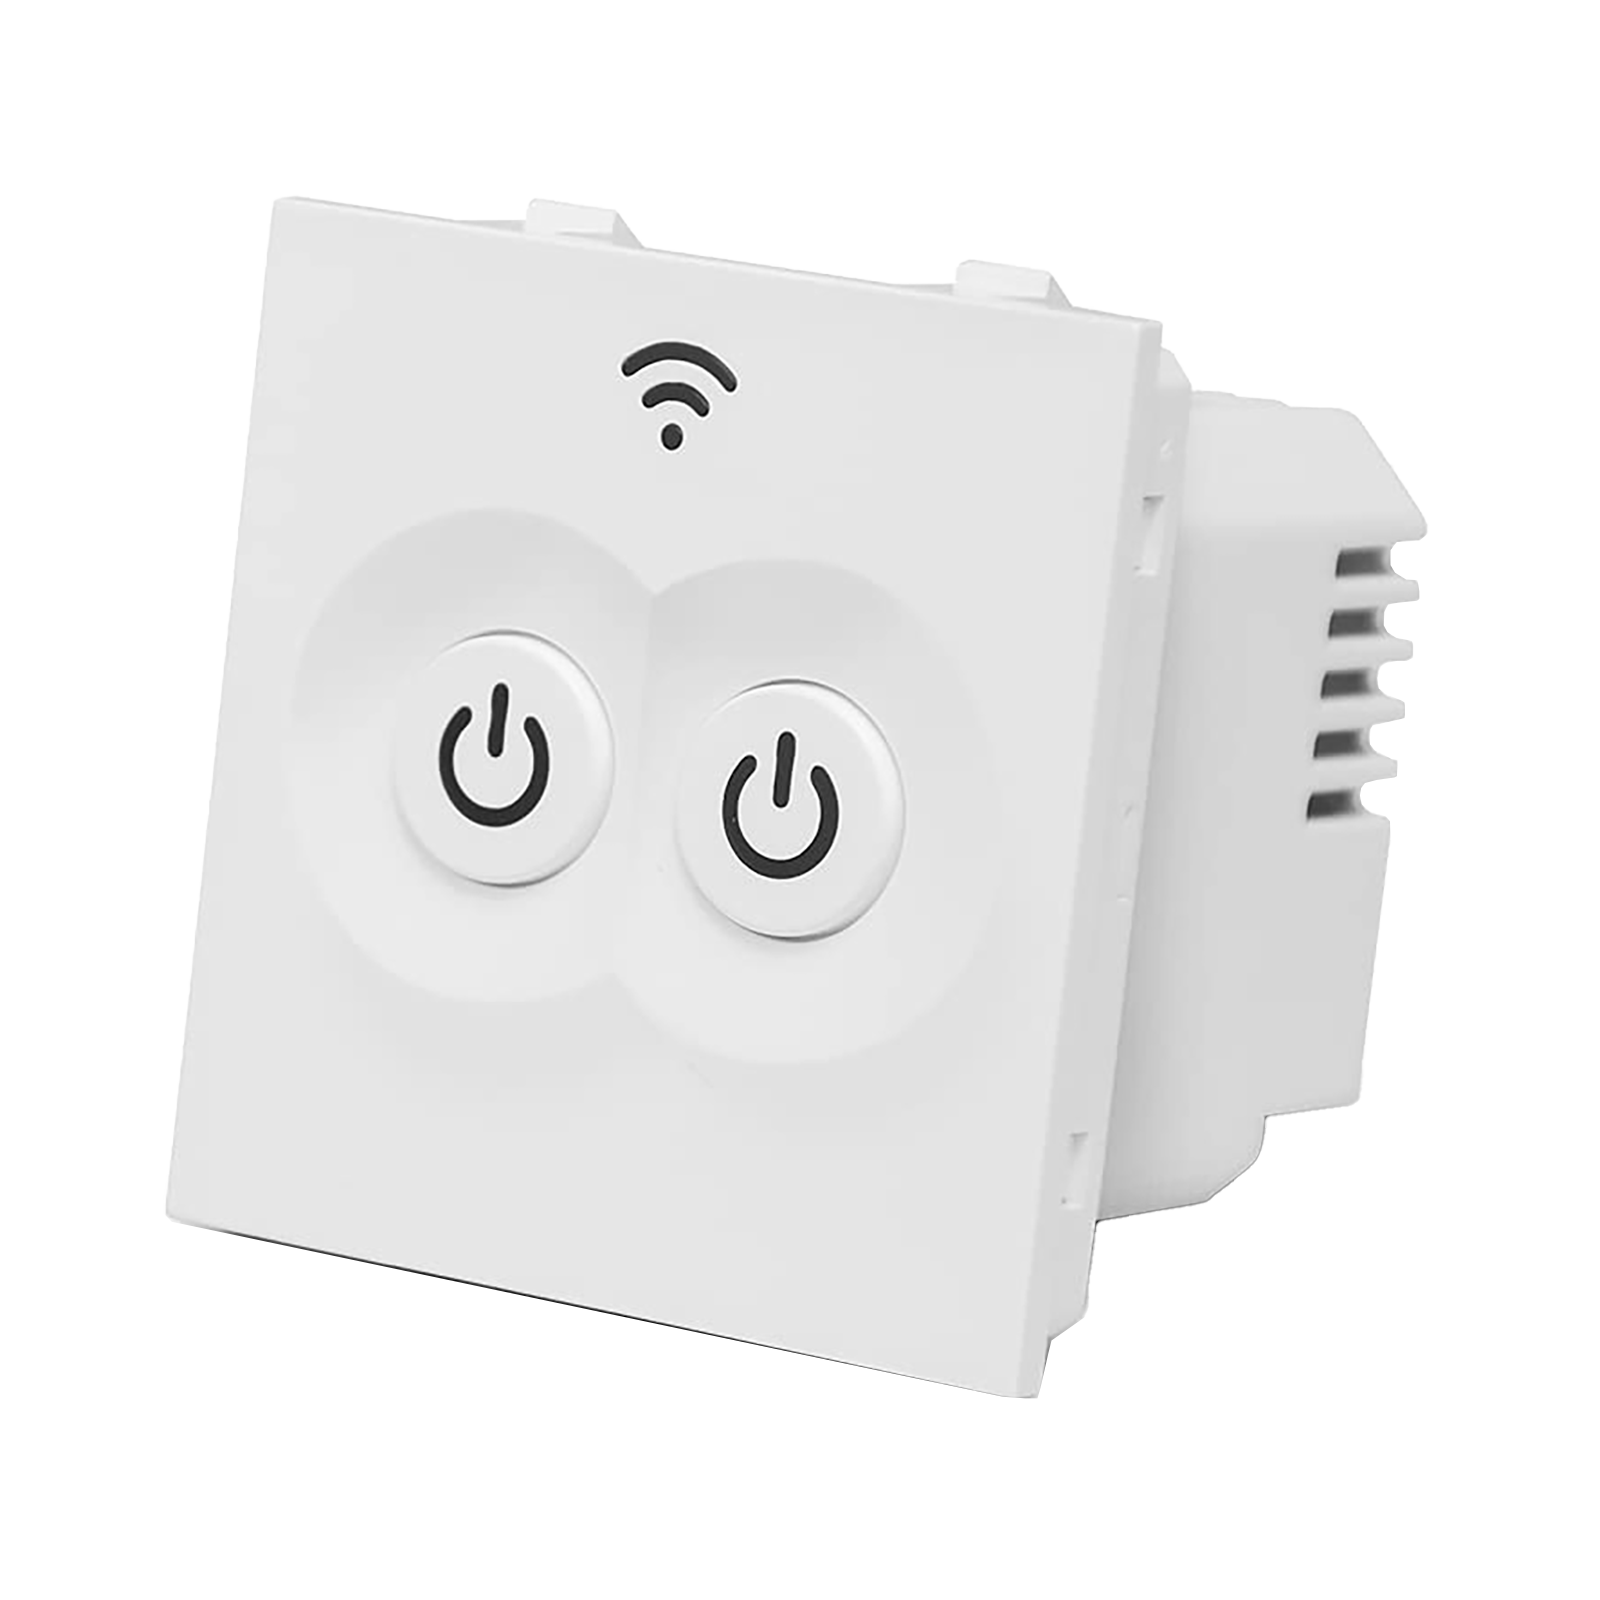 Tata Power EZ Home 5 Amps Smart Switch (2 Gang, Google and Alexa Voice Assisted, GWF-KS001-2, White)